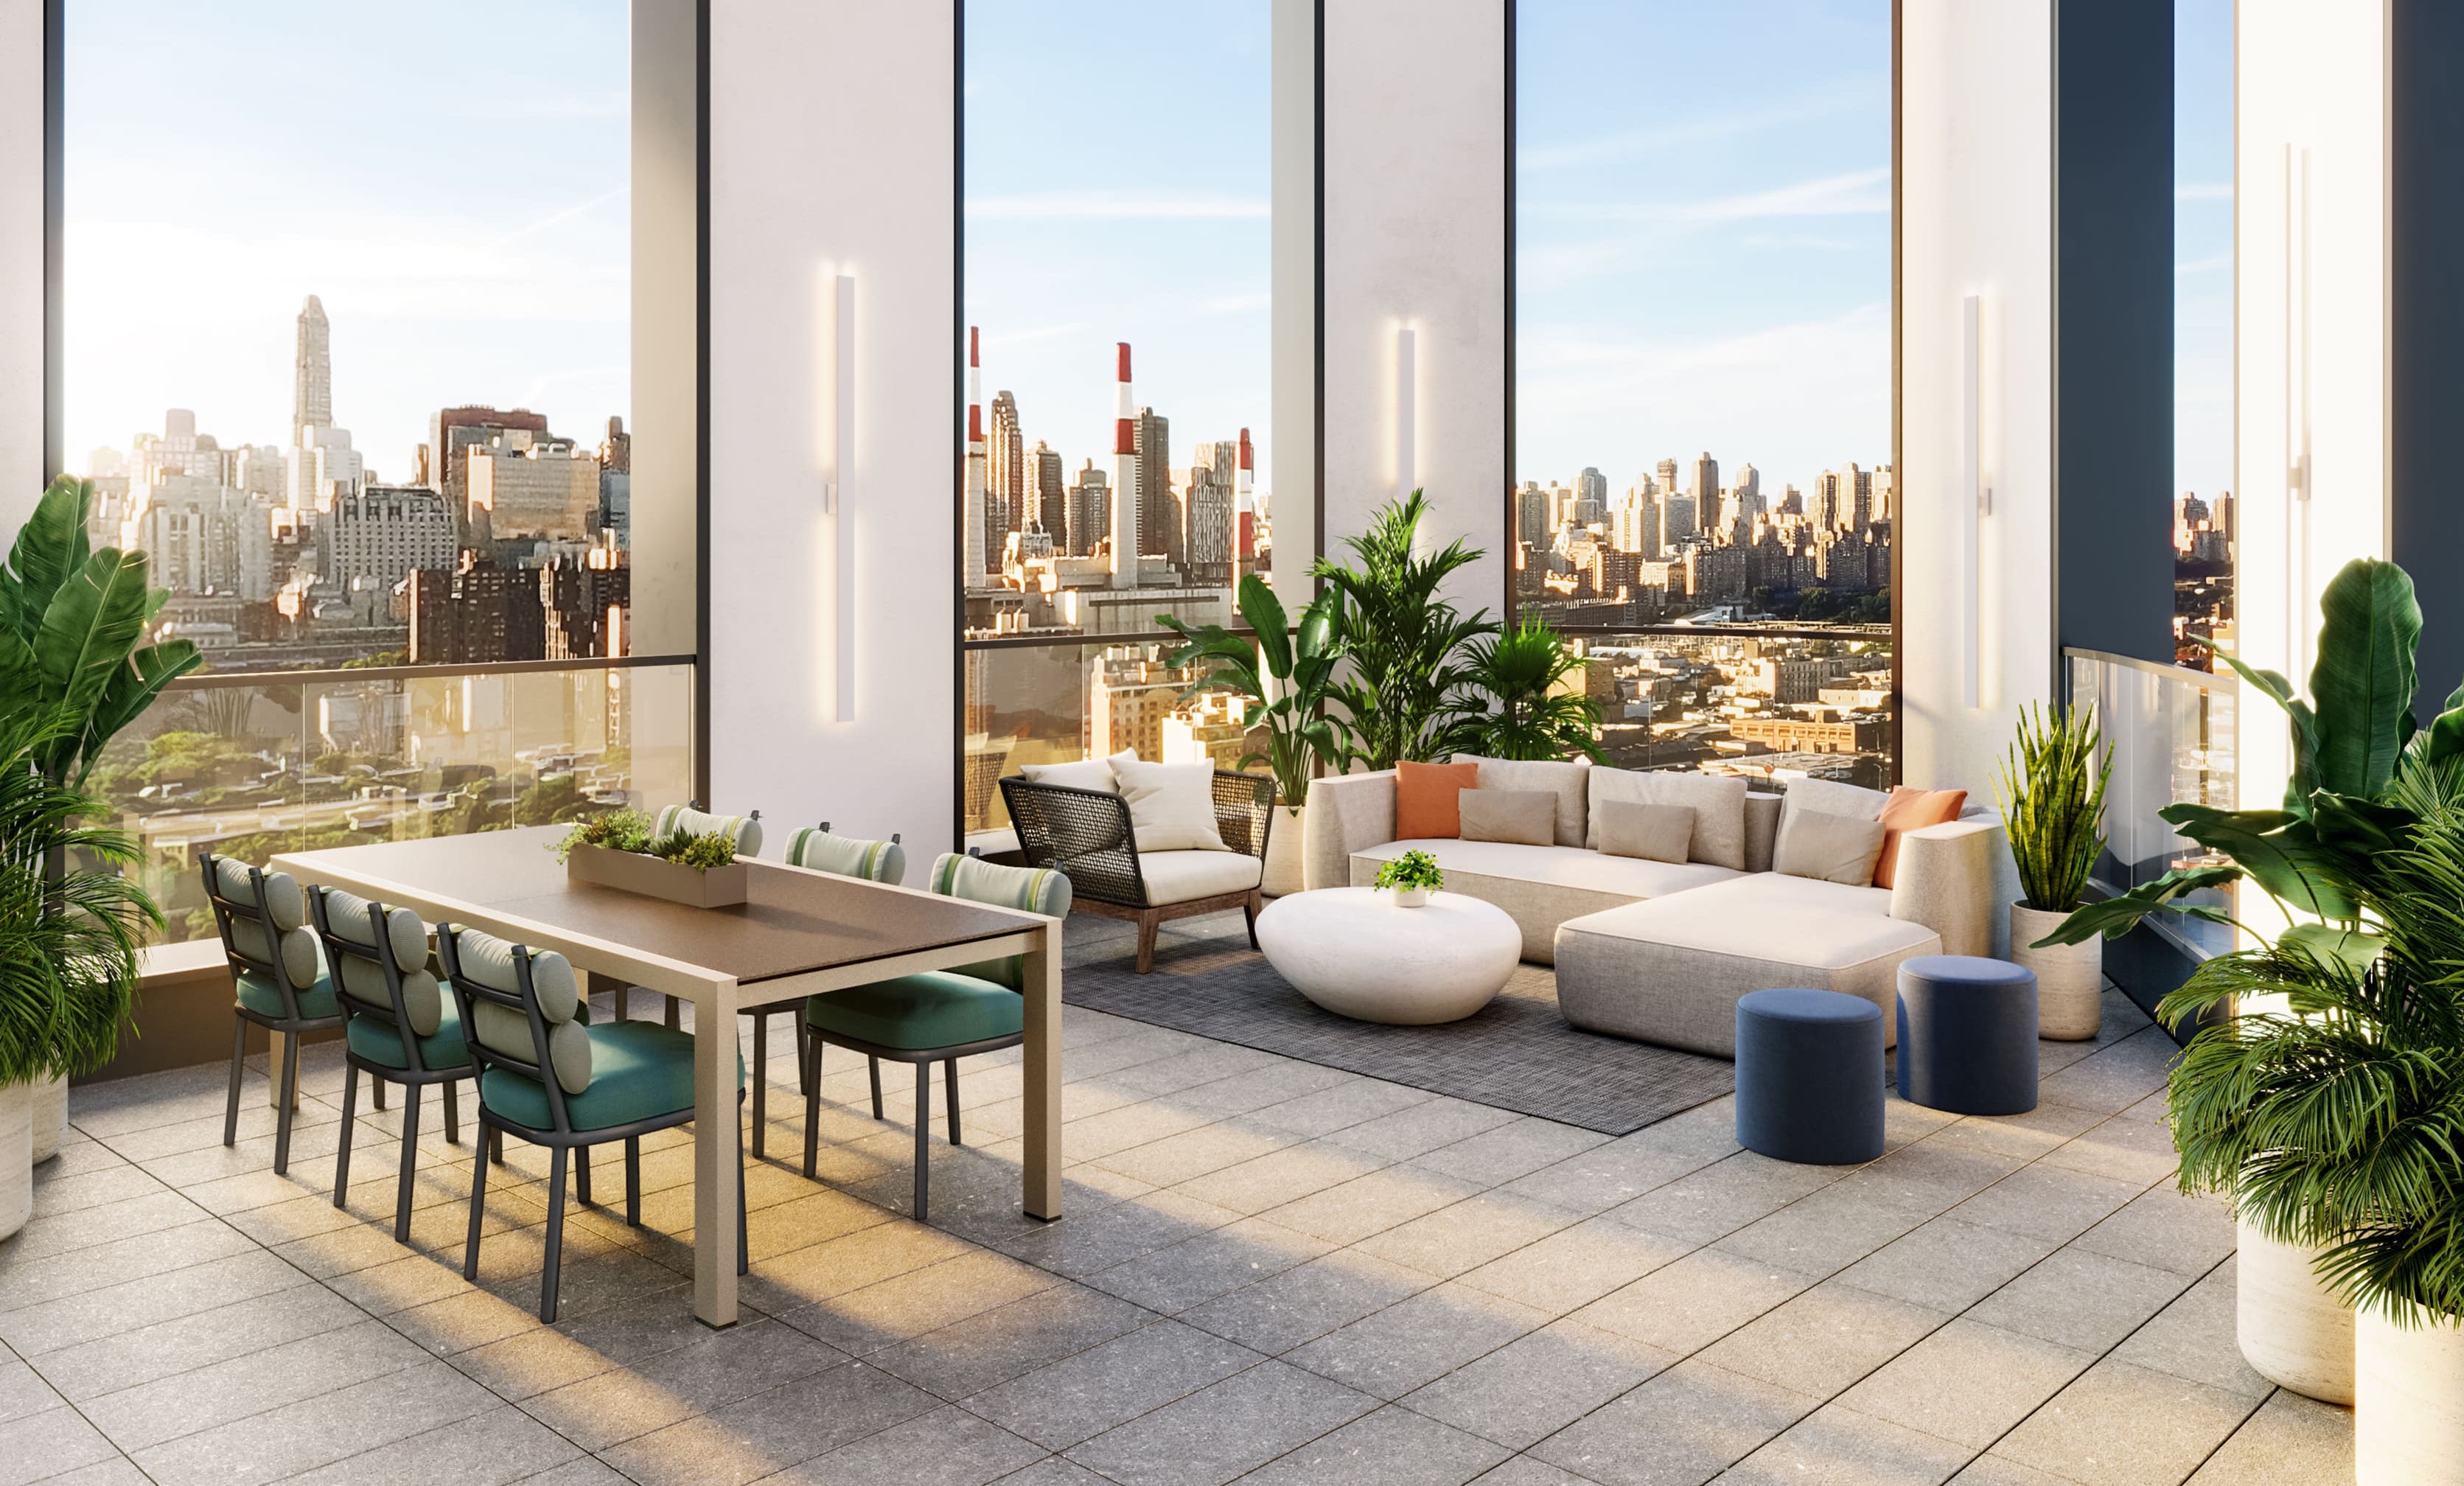 Roof deck amenity at NOVA Long Island City condos. Dining table next to outdoor sectional couch and armchair.